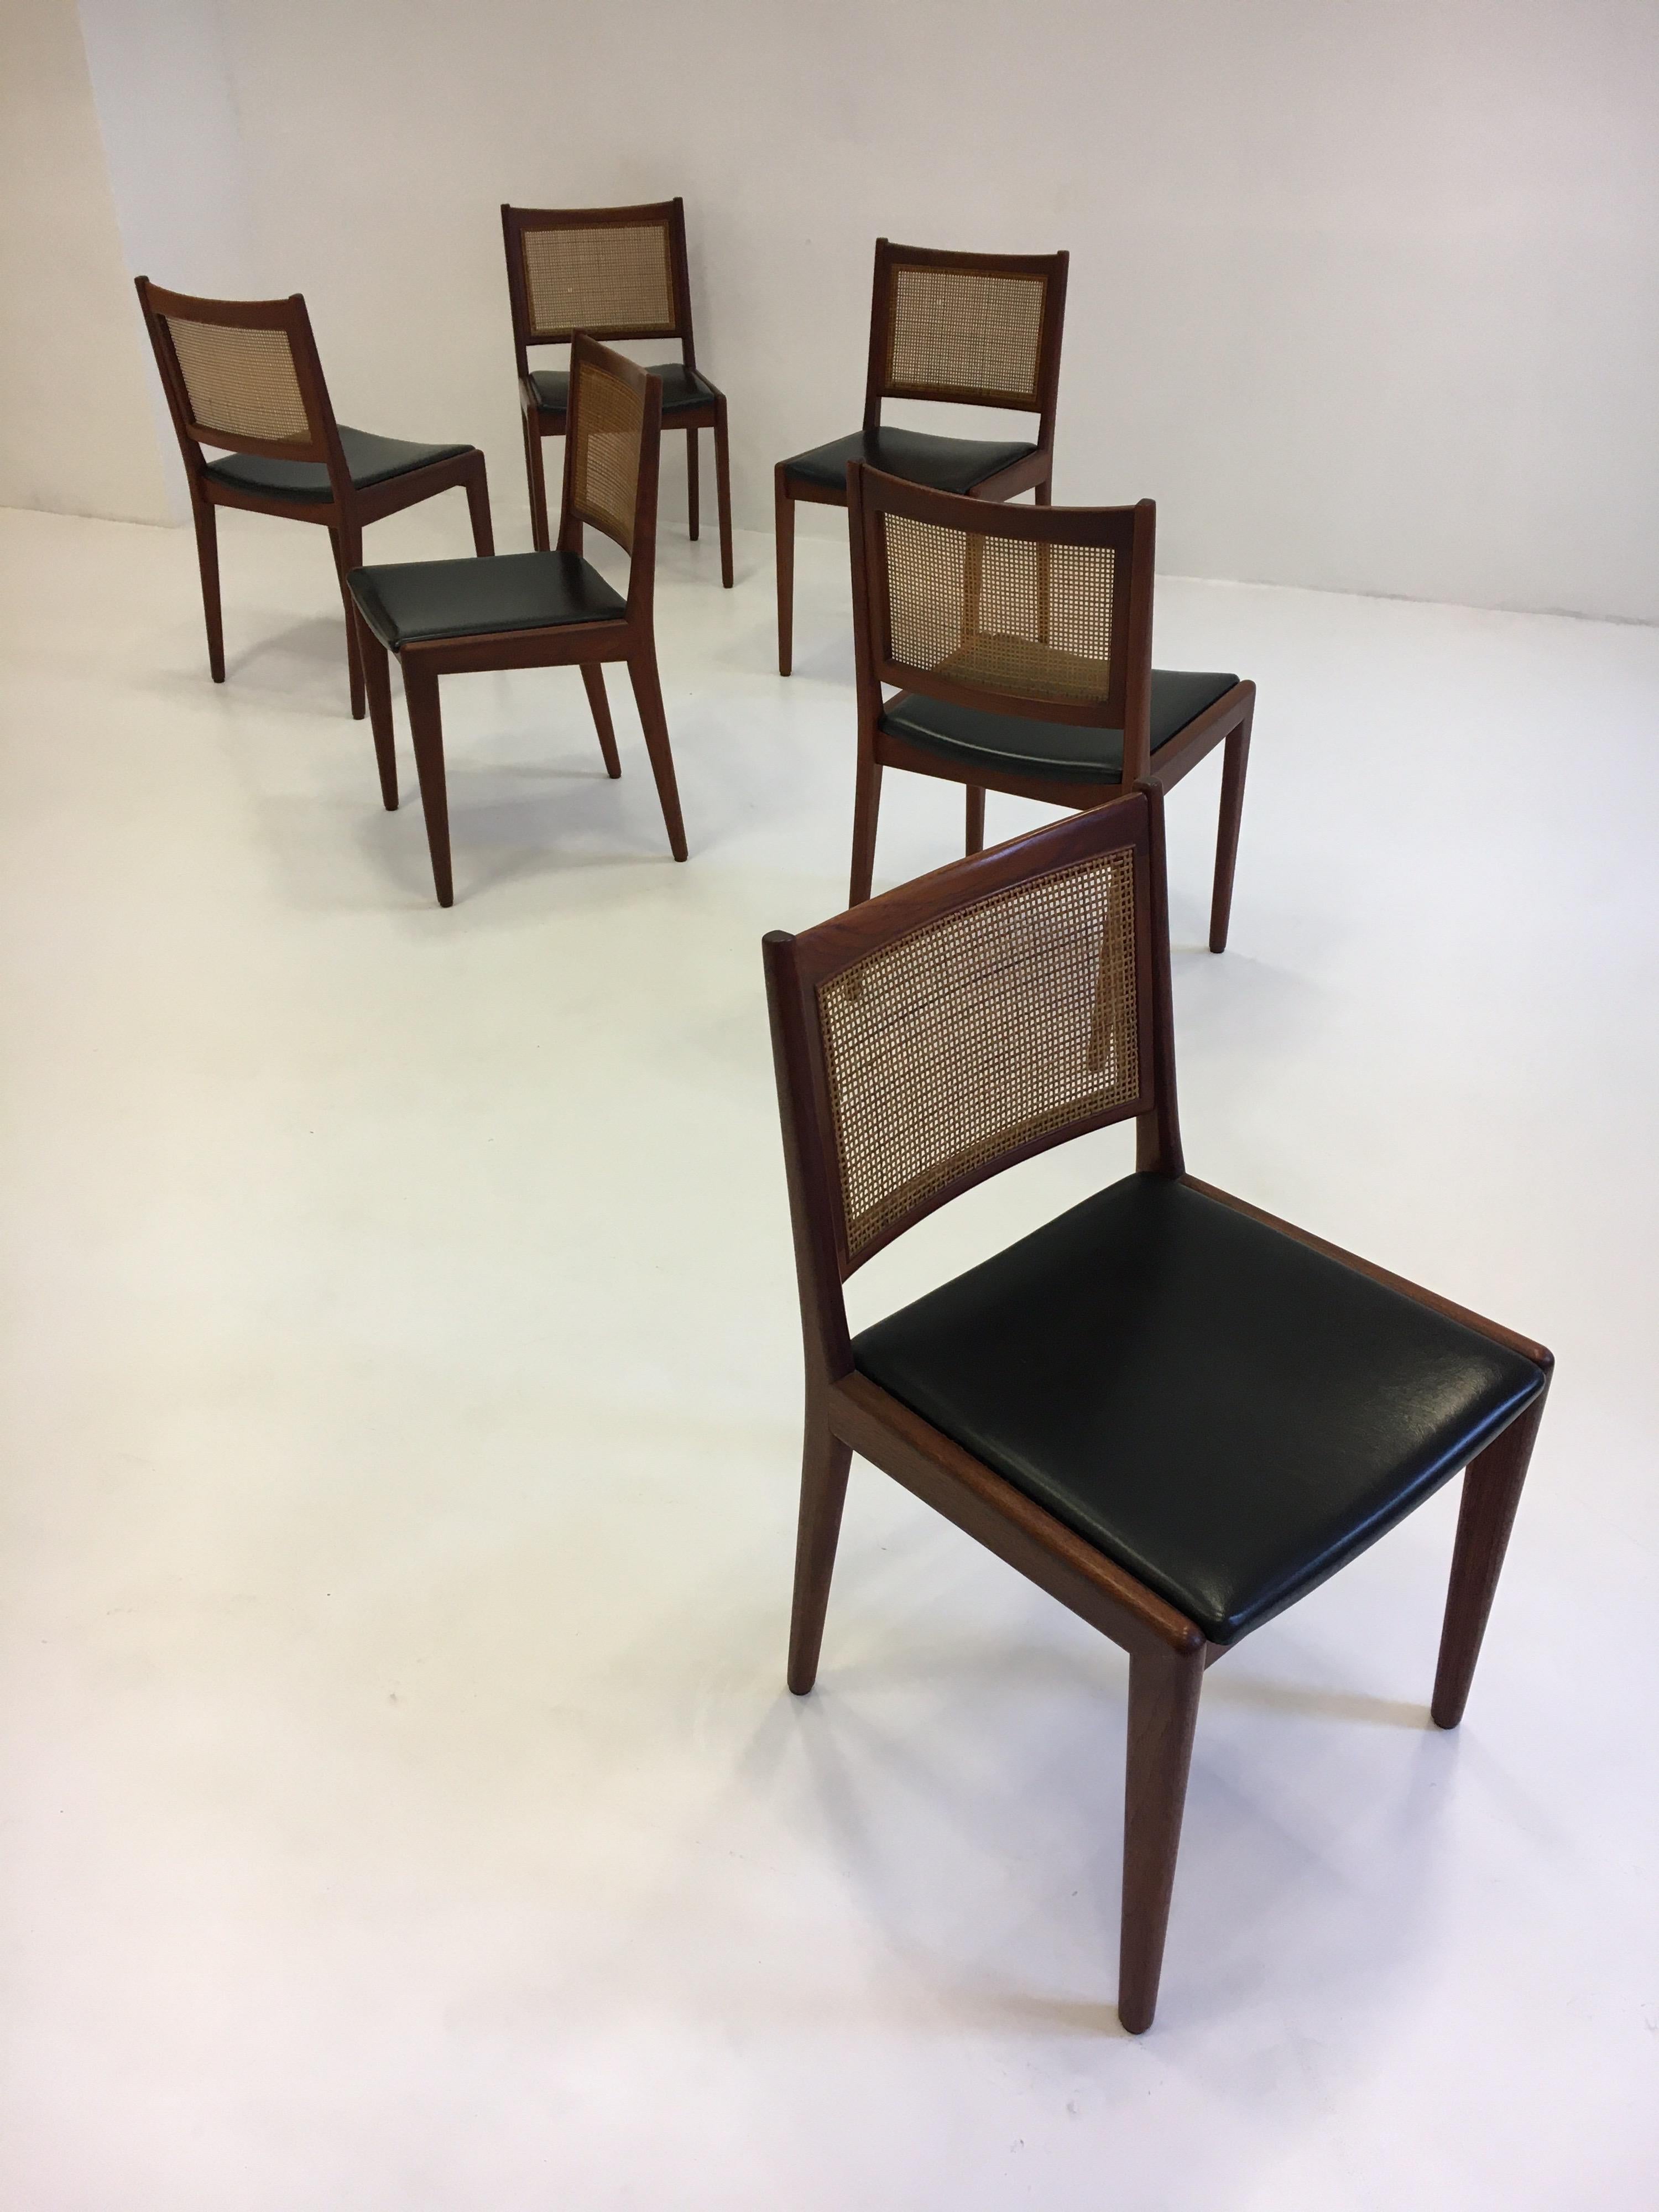 Mid-20th Century Karl-Erik Ekselius Set of Six Dining Chairs in Teak and Cane, Sweden, 1950s